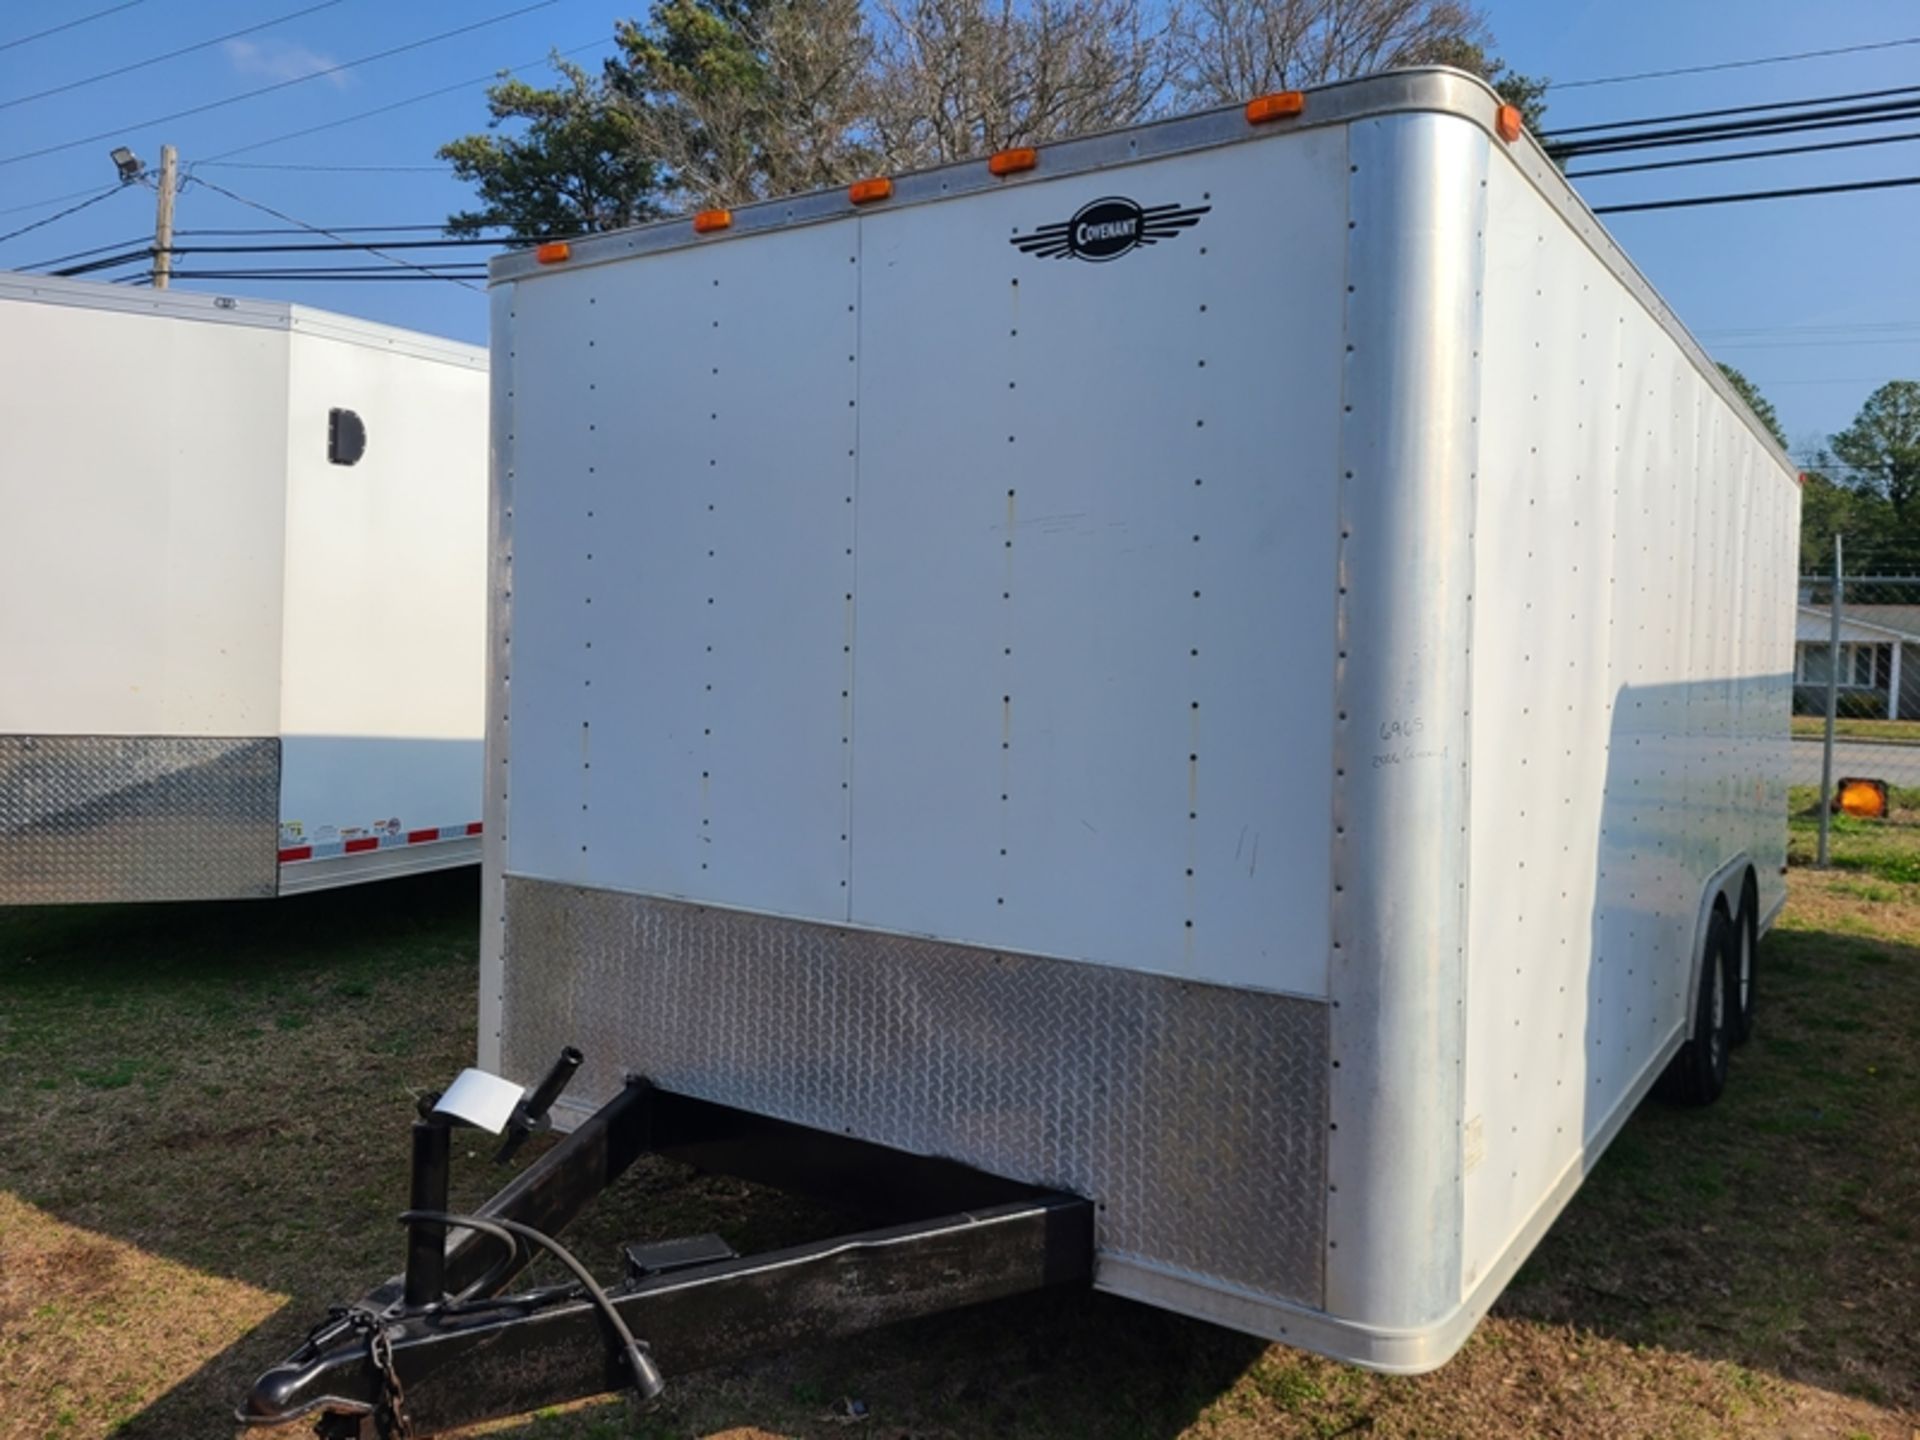 2006 COVENANT CARGO dual-axle enclosed trailer - VIN: 5RMBE20266D005948 - Image 7 of 7